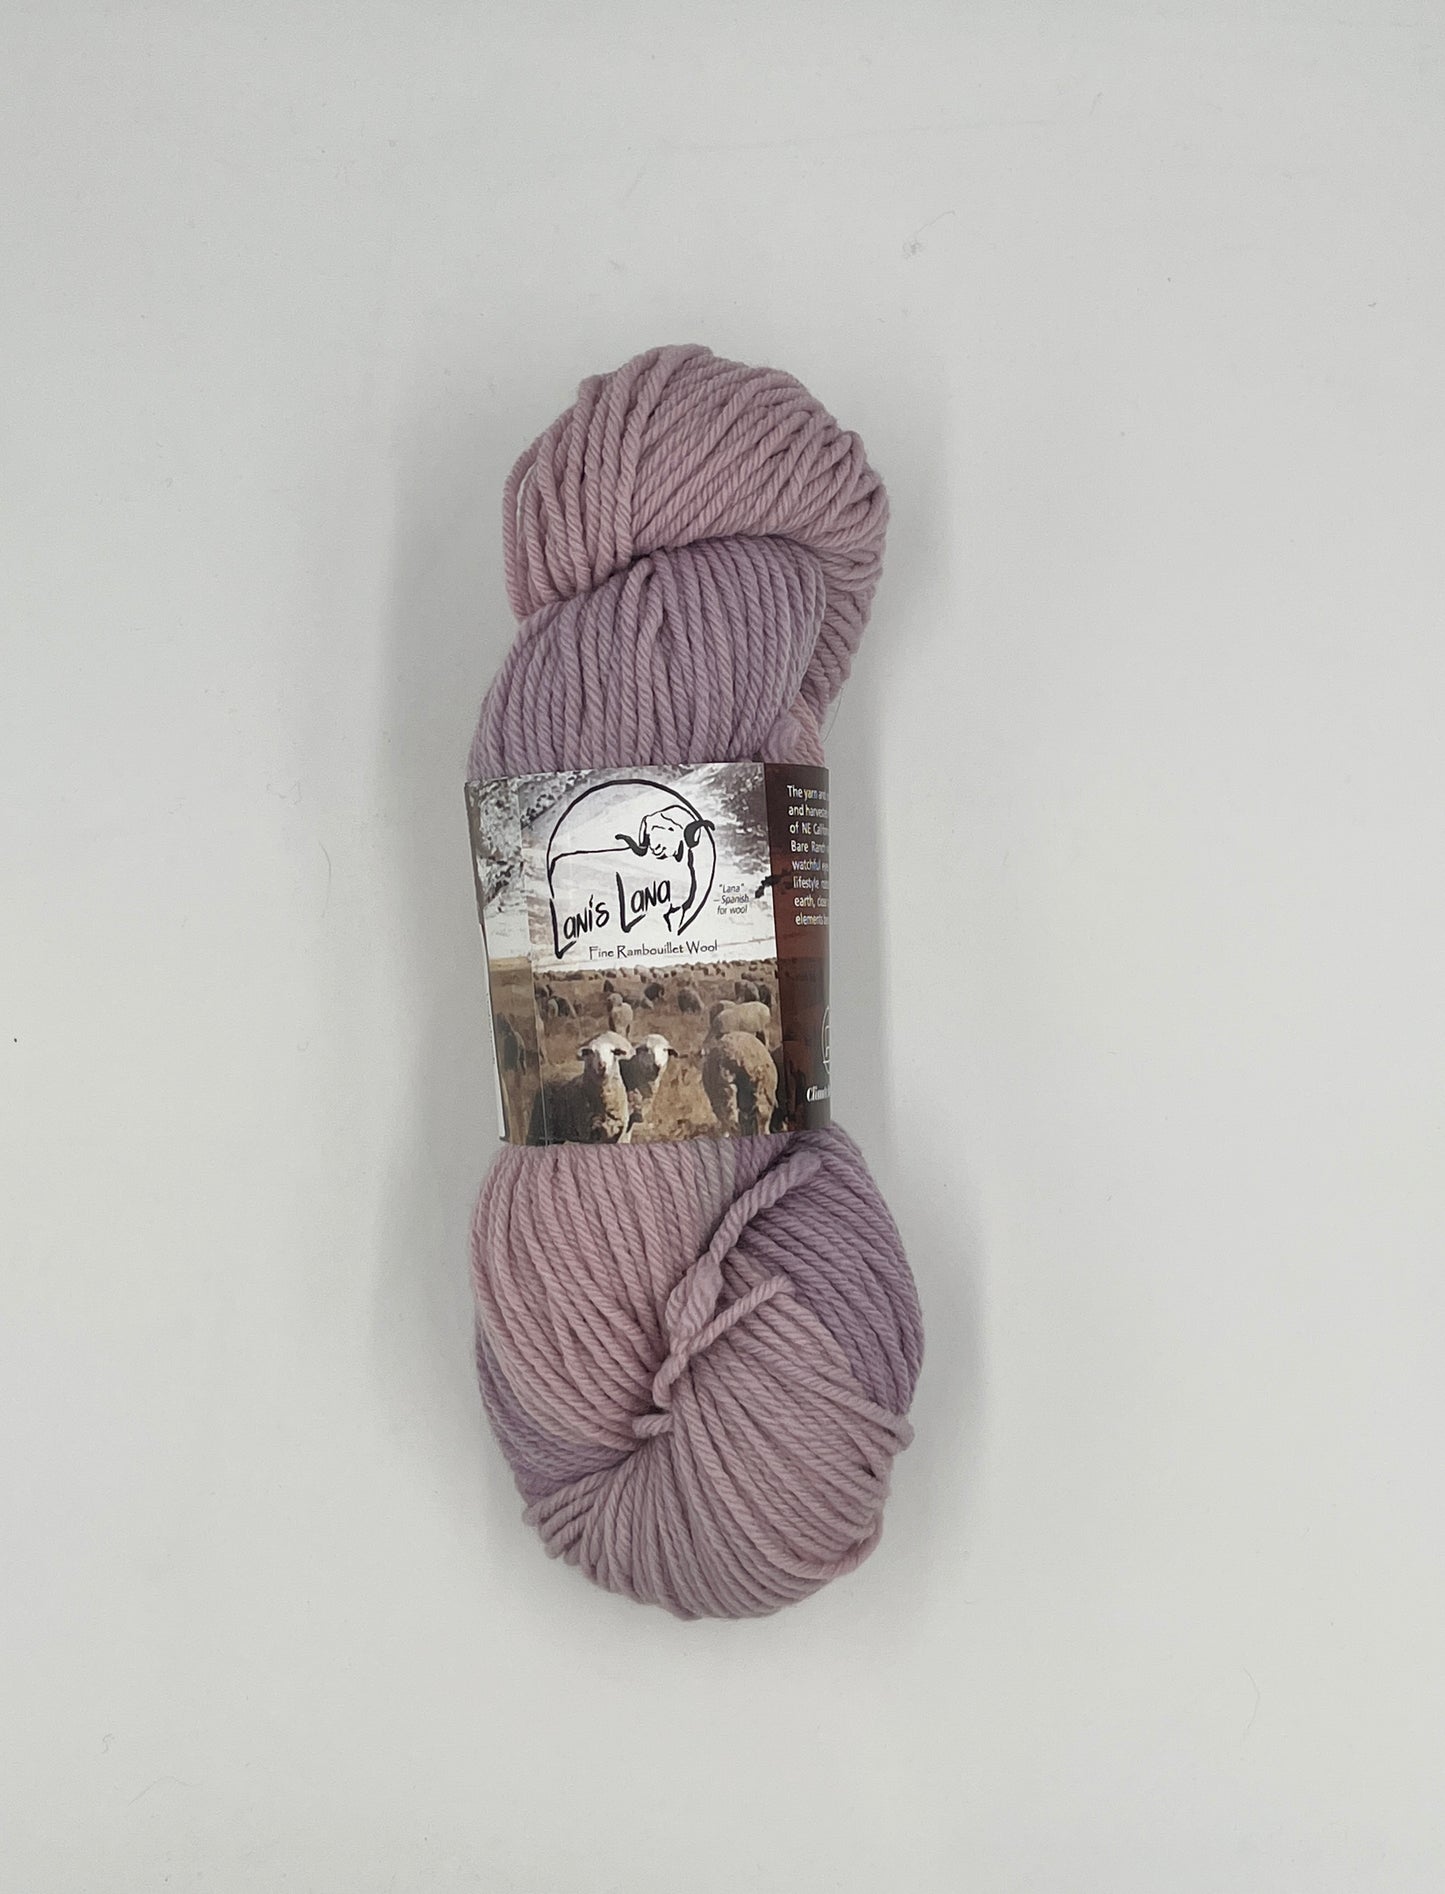 Clarks Valley - Naturally Dyed Aran Weight Yarn